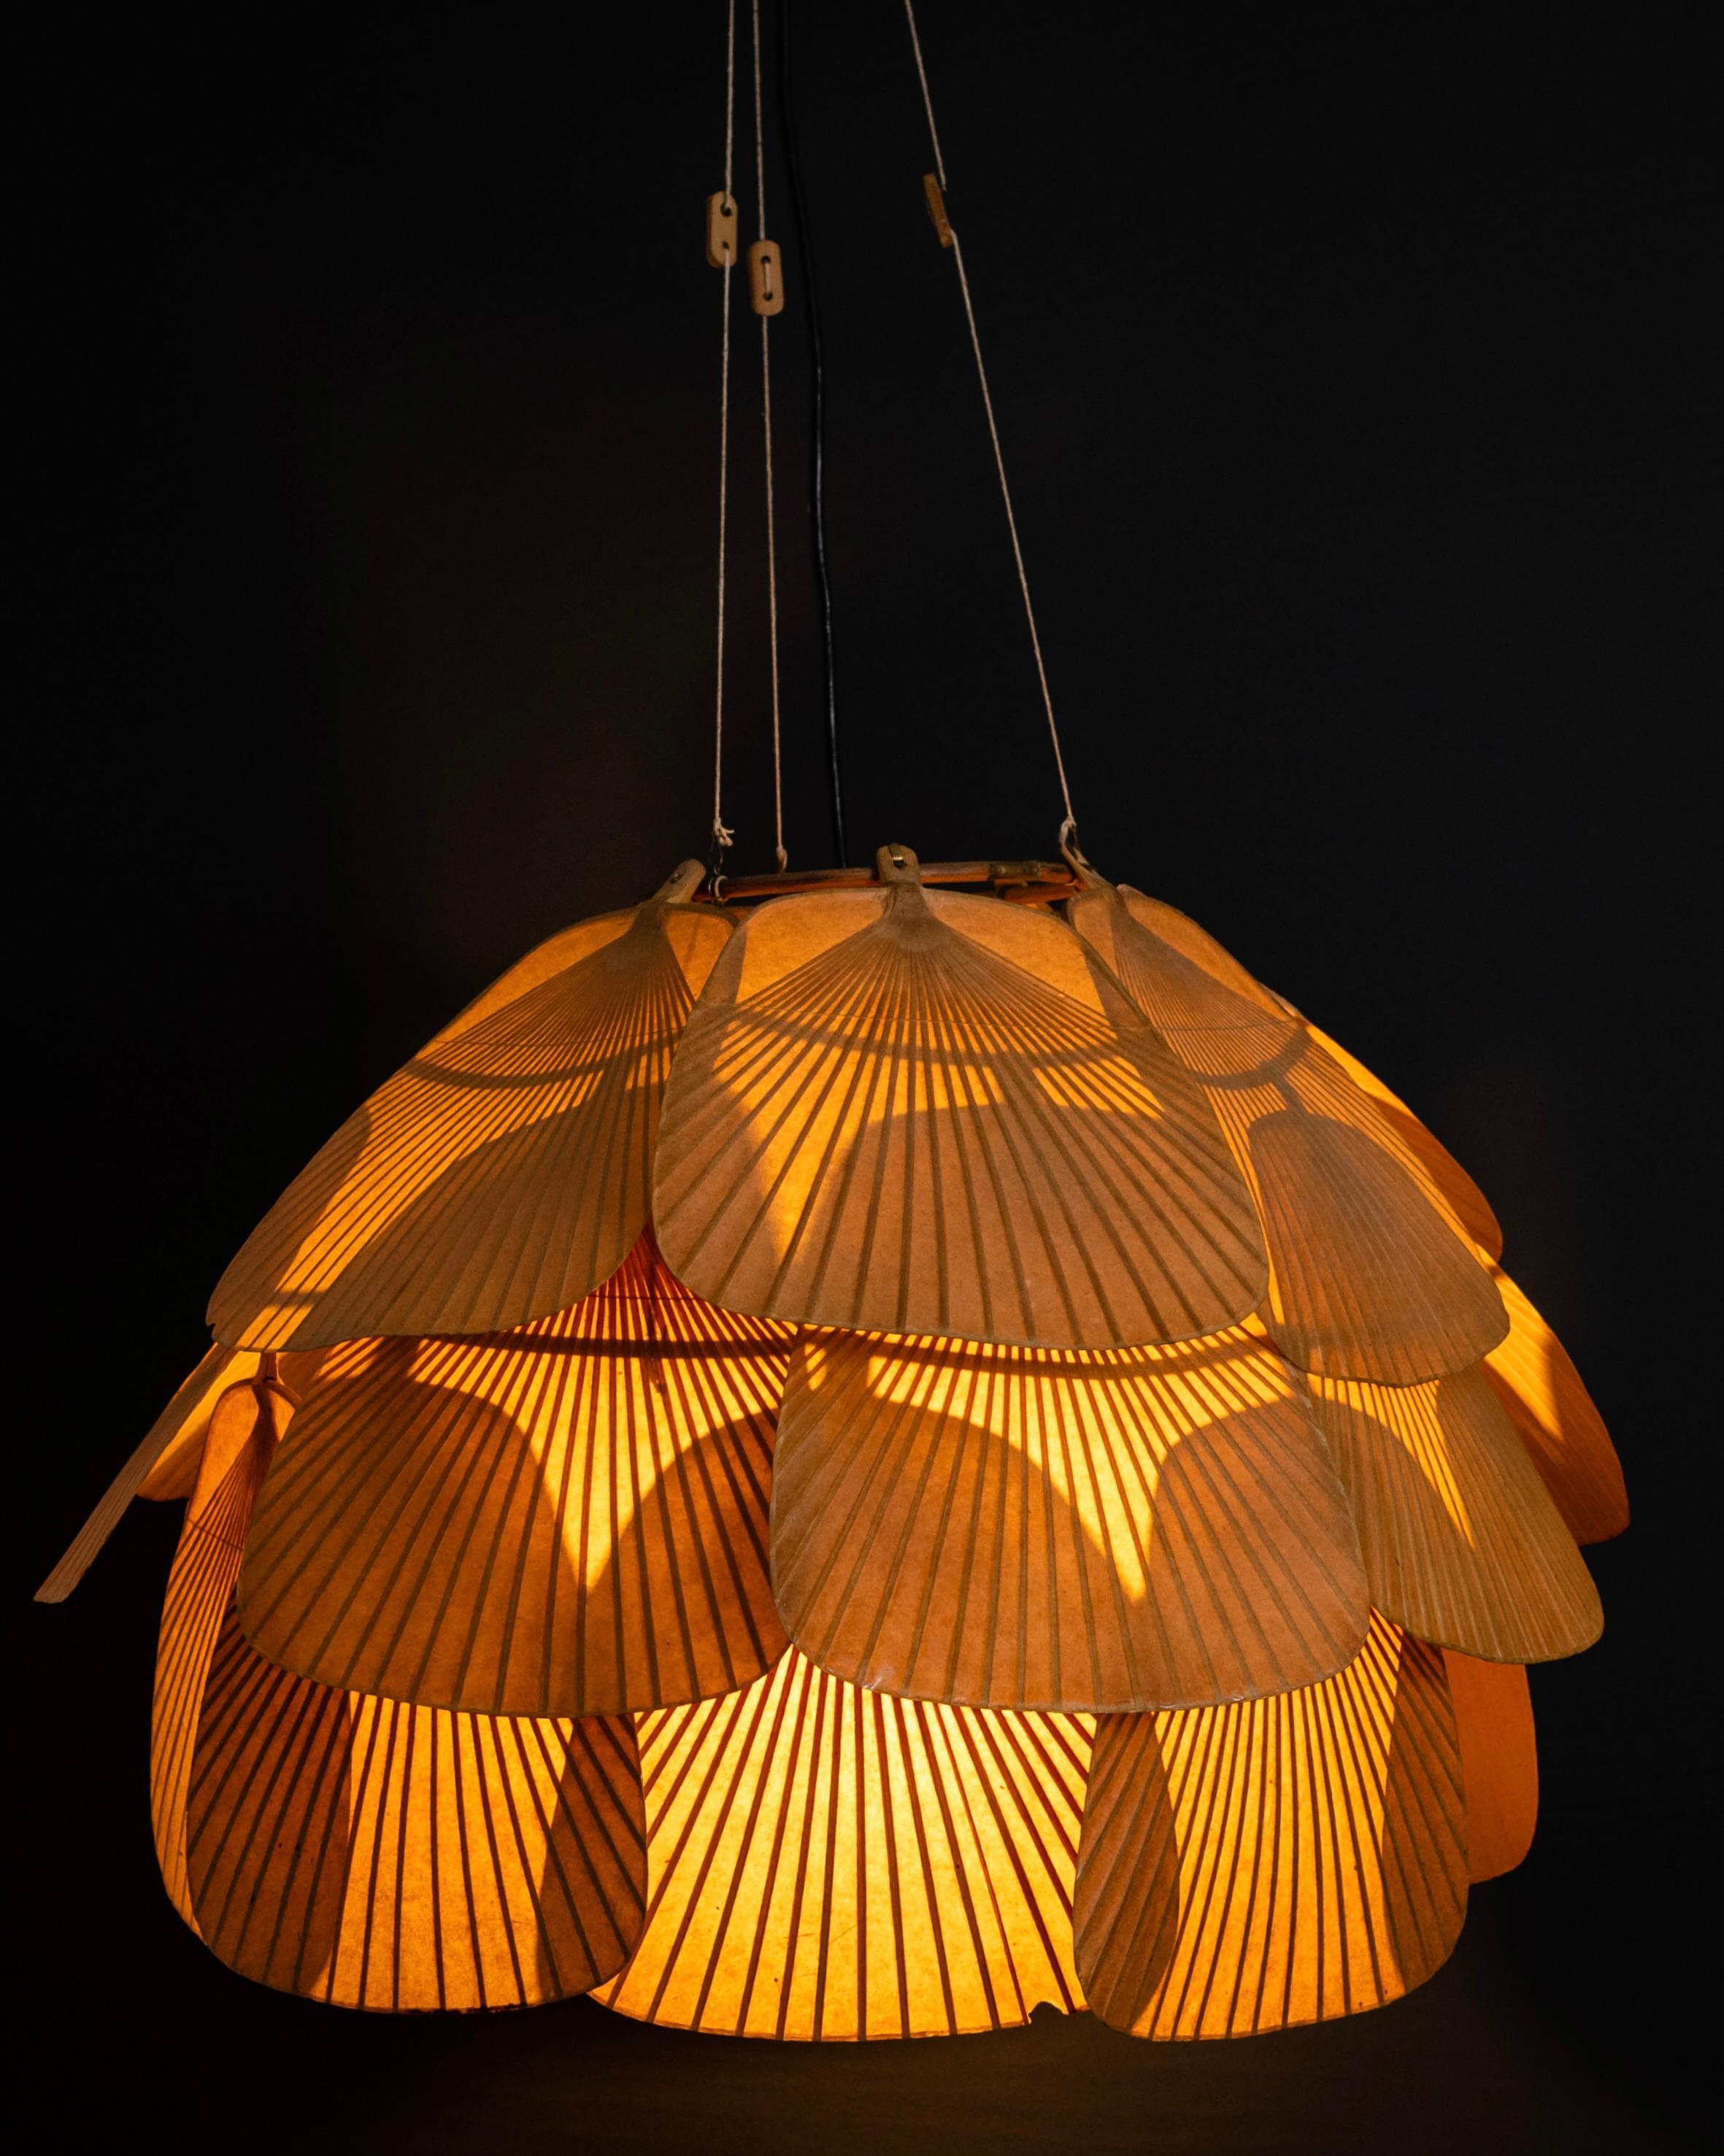 Splendid version of the rare Uchiwa Fan lamp by Ingo Maurer. We have seen many Ingo Maurer lamps but this one is stunning. It has such an amazing patina due to its age, only reachable by keeping this in a dark spot all those years, without any